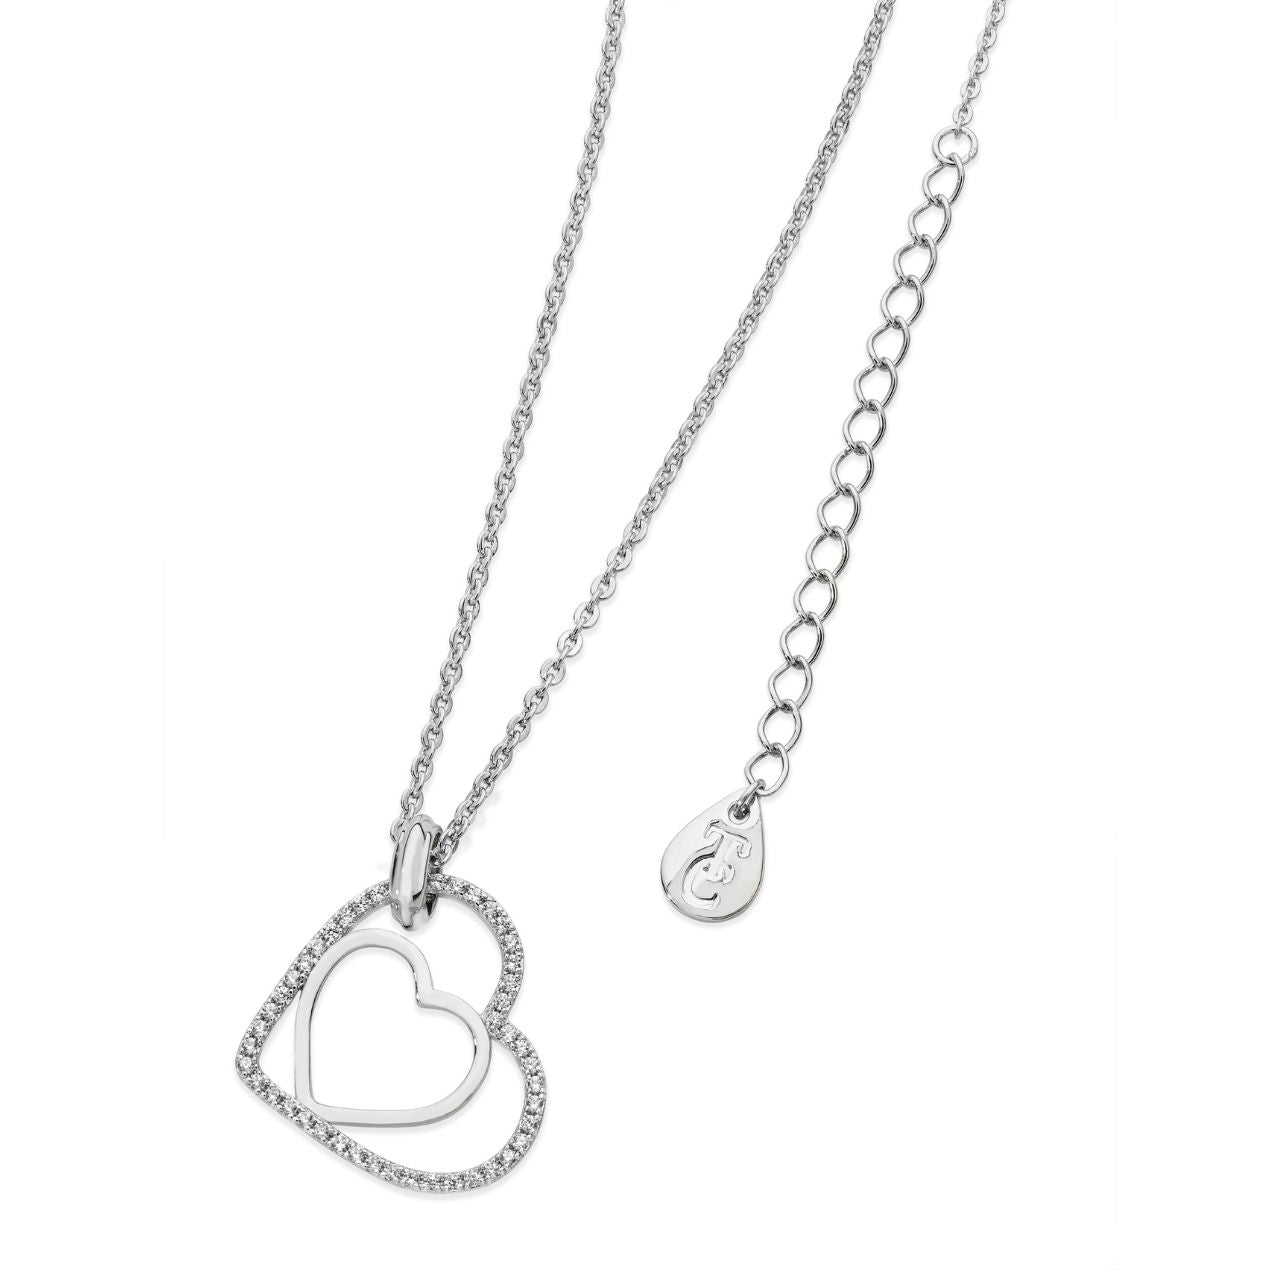 Sterling Silver Floating Heart Pendant by Tipperary  This beautiful sterling silver floating heart pendant by Tipperary is the perfect way to show your love. Crafted with a durable sterling silver, this timeless pendant will remain a treasured item for years to come.